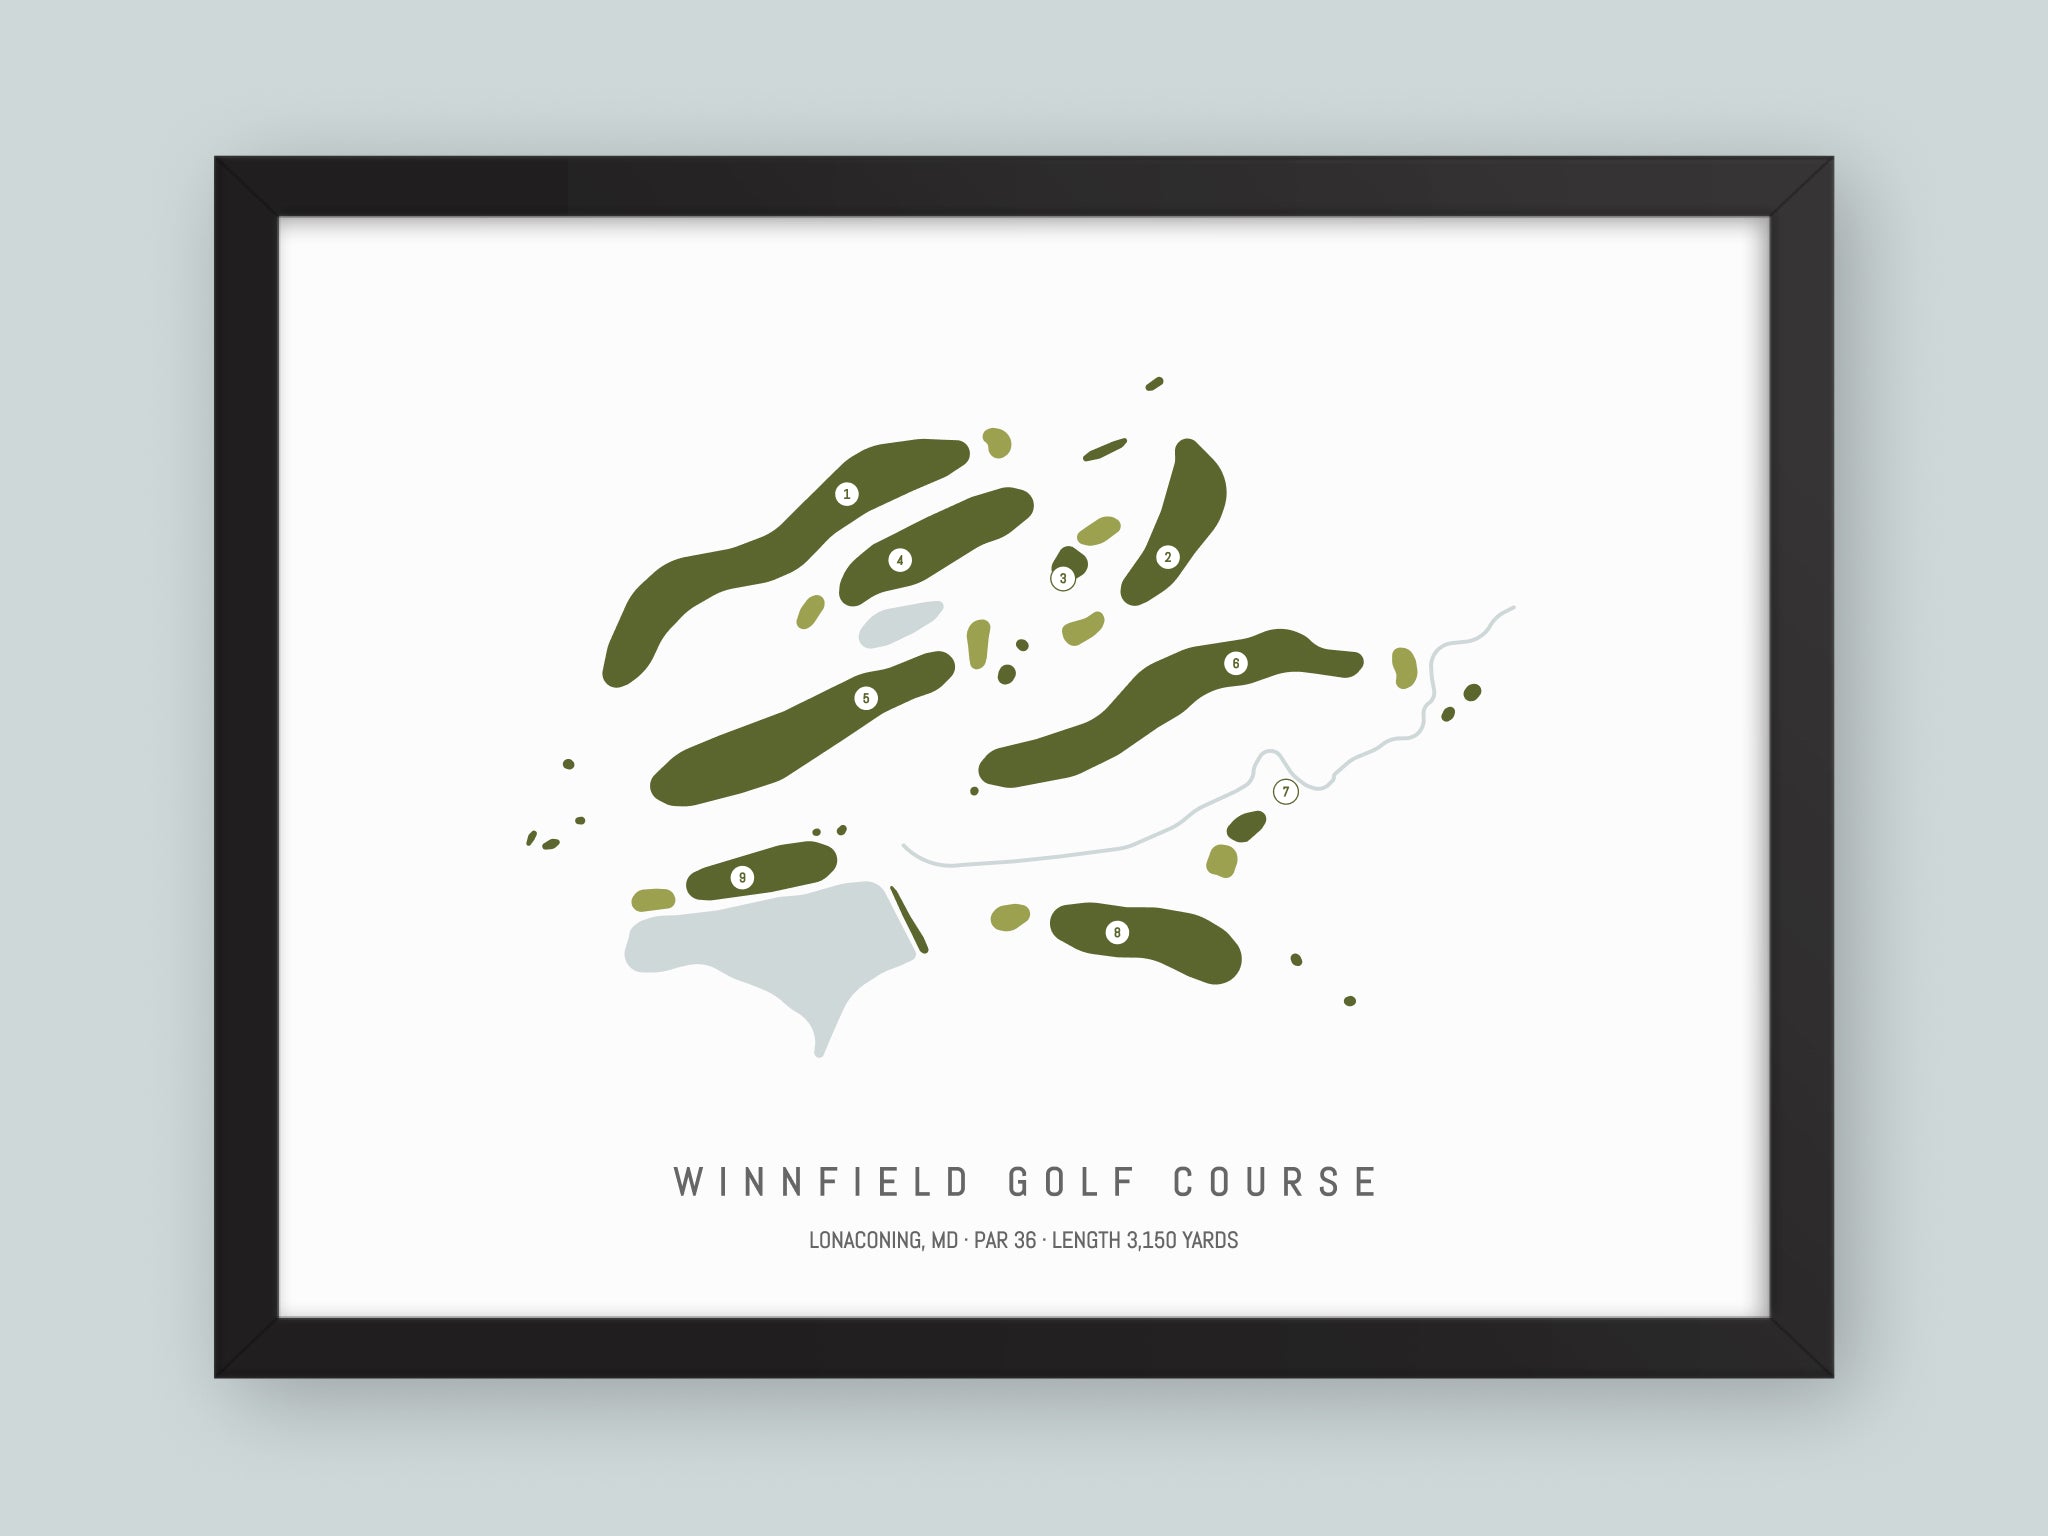 Winnfield-Golf-Course-MD--Black-Frame-24x18-With-Hole-Numbers